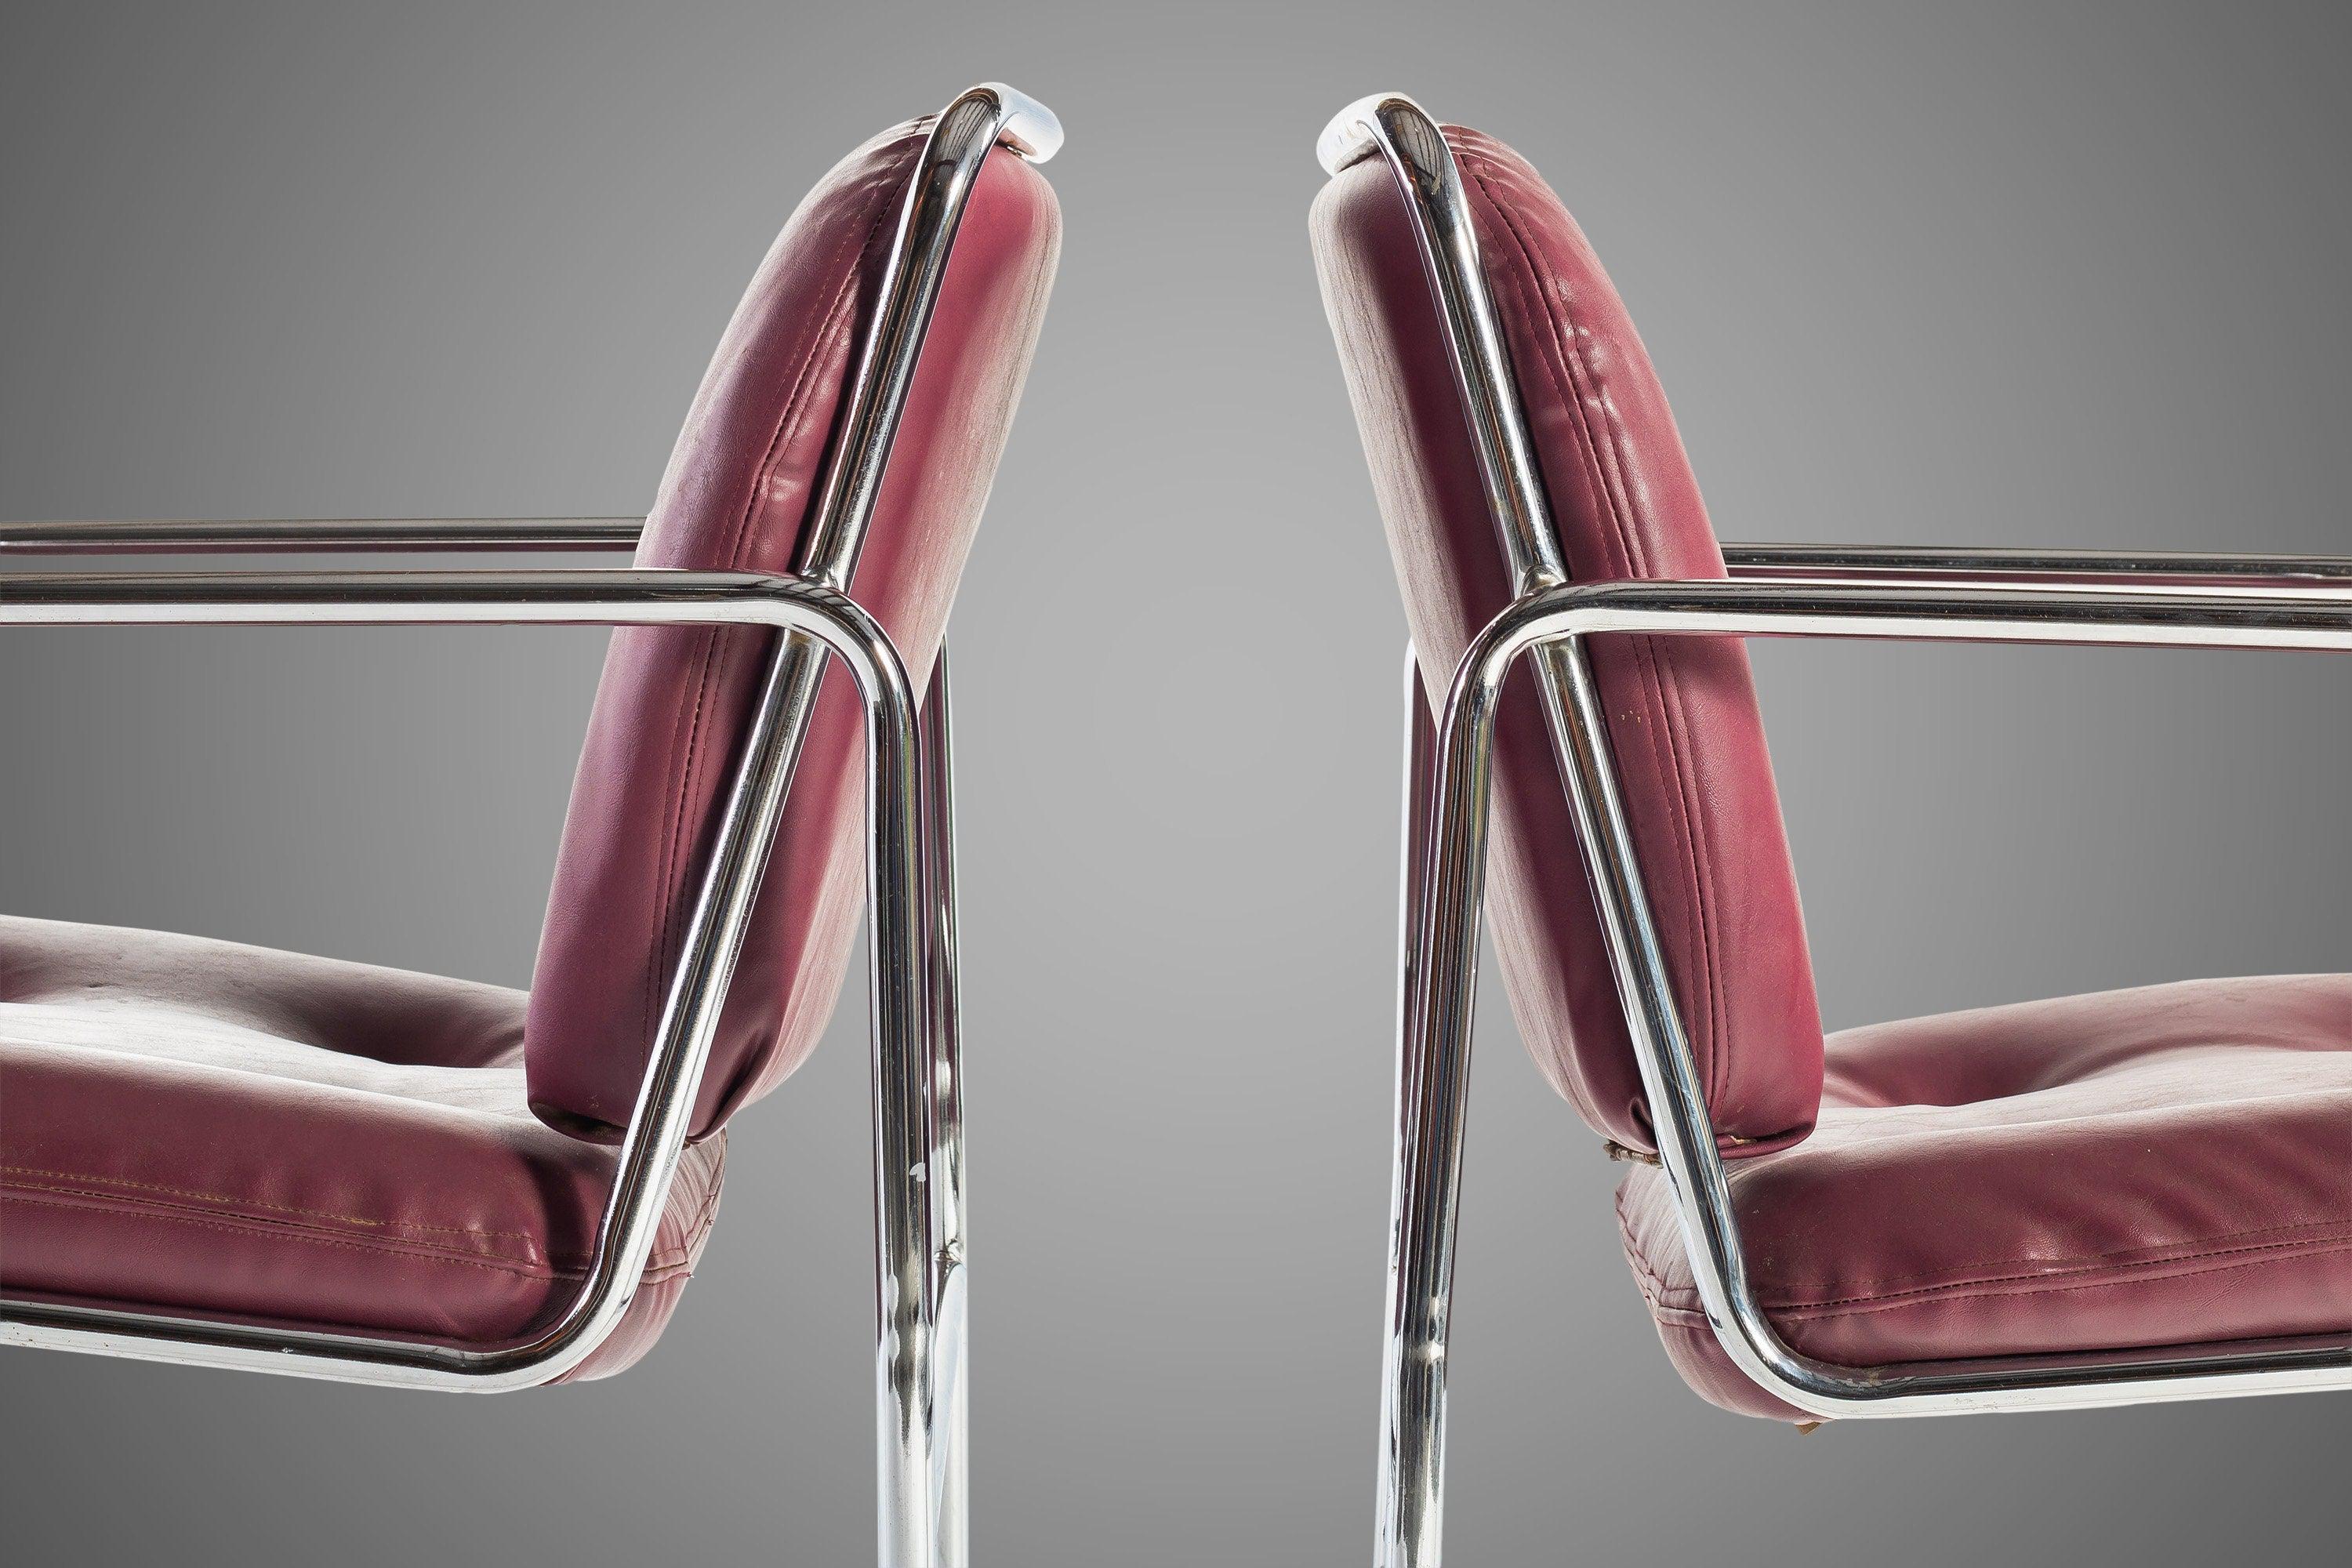 Chrome plated steel tubular frames support original oxblood tufted vinyl seats. Circa 1960s.

---Dimensions---

Width: 20.25 in / 51.44 cm
Depth: 24 in / 60.96 cm
Height: 31.25 in / 79.38 cm
Seat Height: 18.5 in / 46.99 cm
Arm Height: 25.25 in /